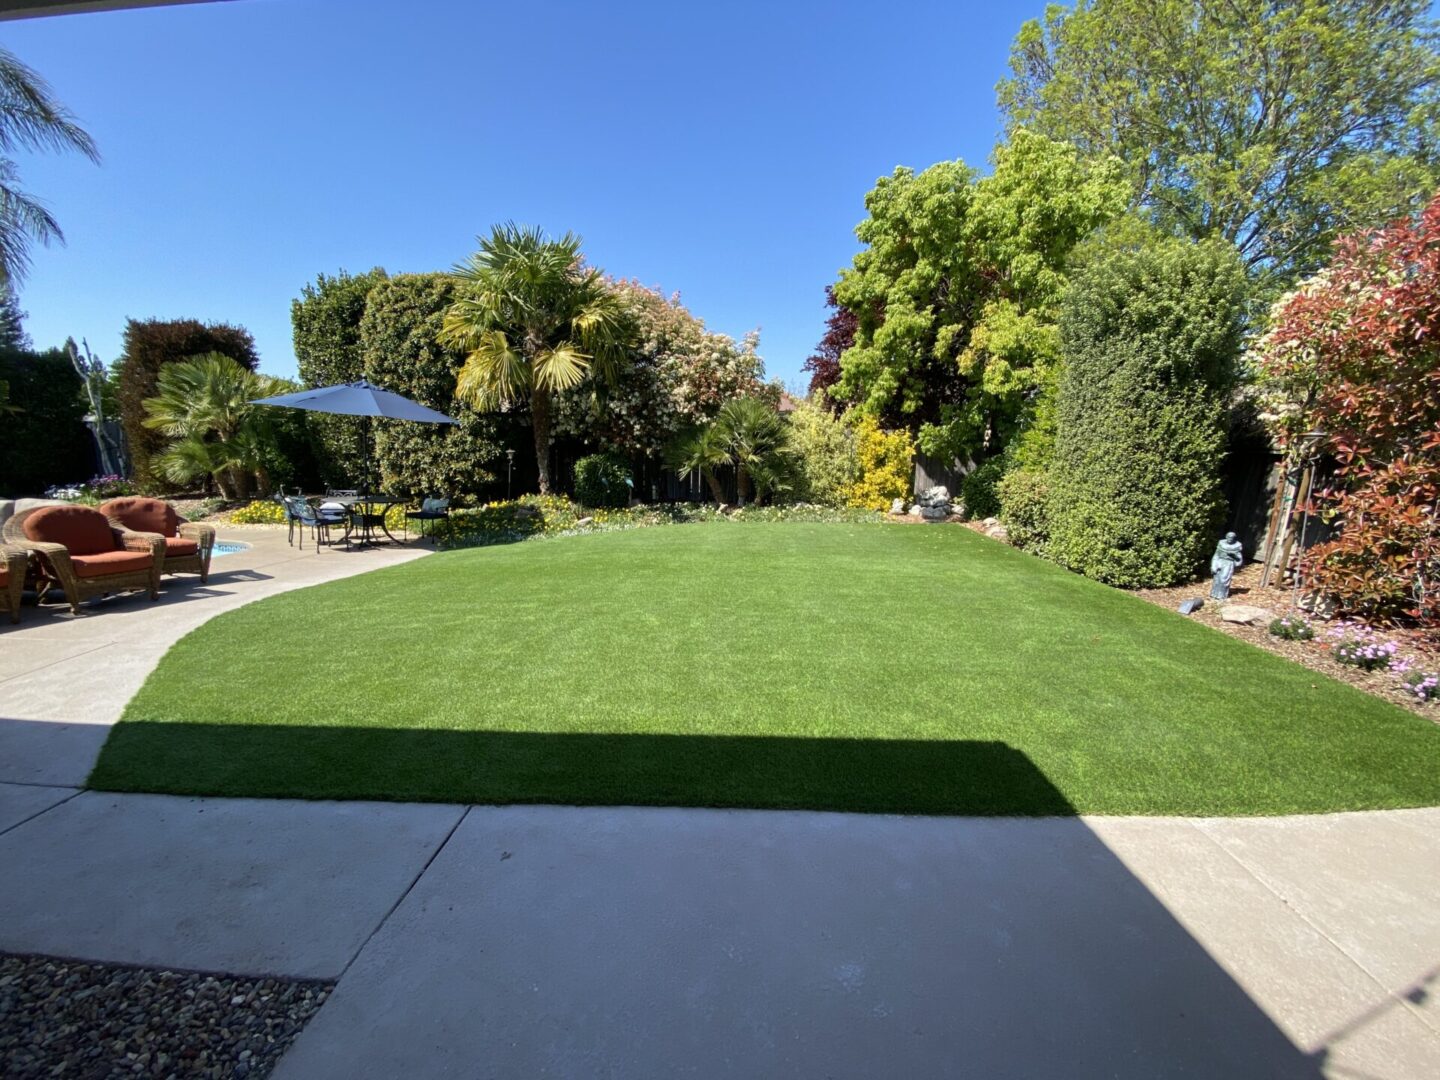 Artificial lawn with umbrella table and chairs, landscaping service by Guys Yard Design in Sonoma, CA